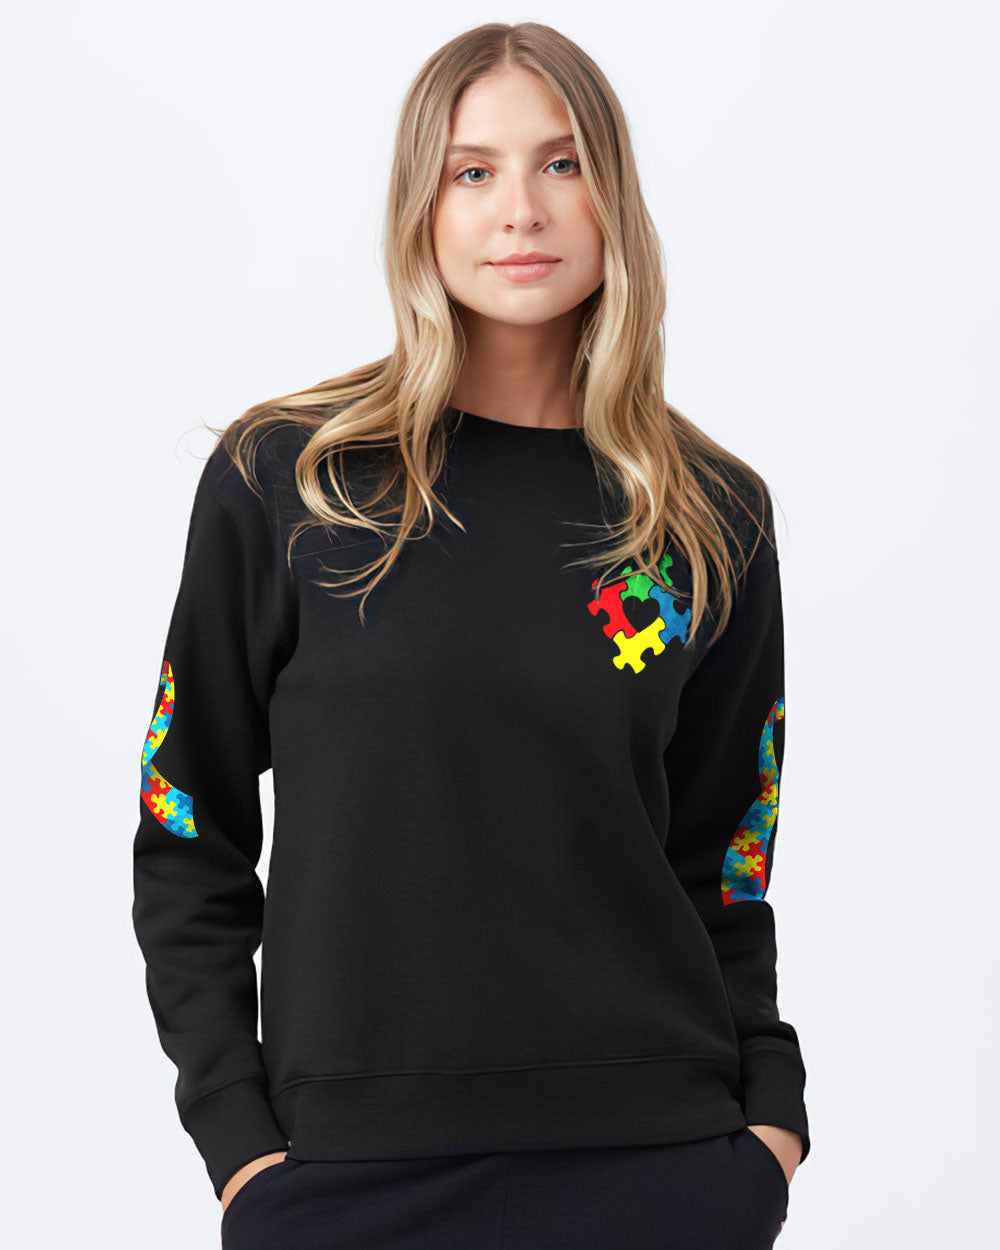 It Takes A Special Mom To Hear What A Son Cannot Say Dinosaur Women's Autism Awareness Sweatshirt